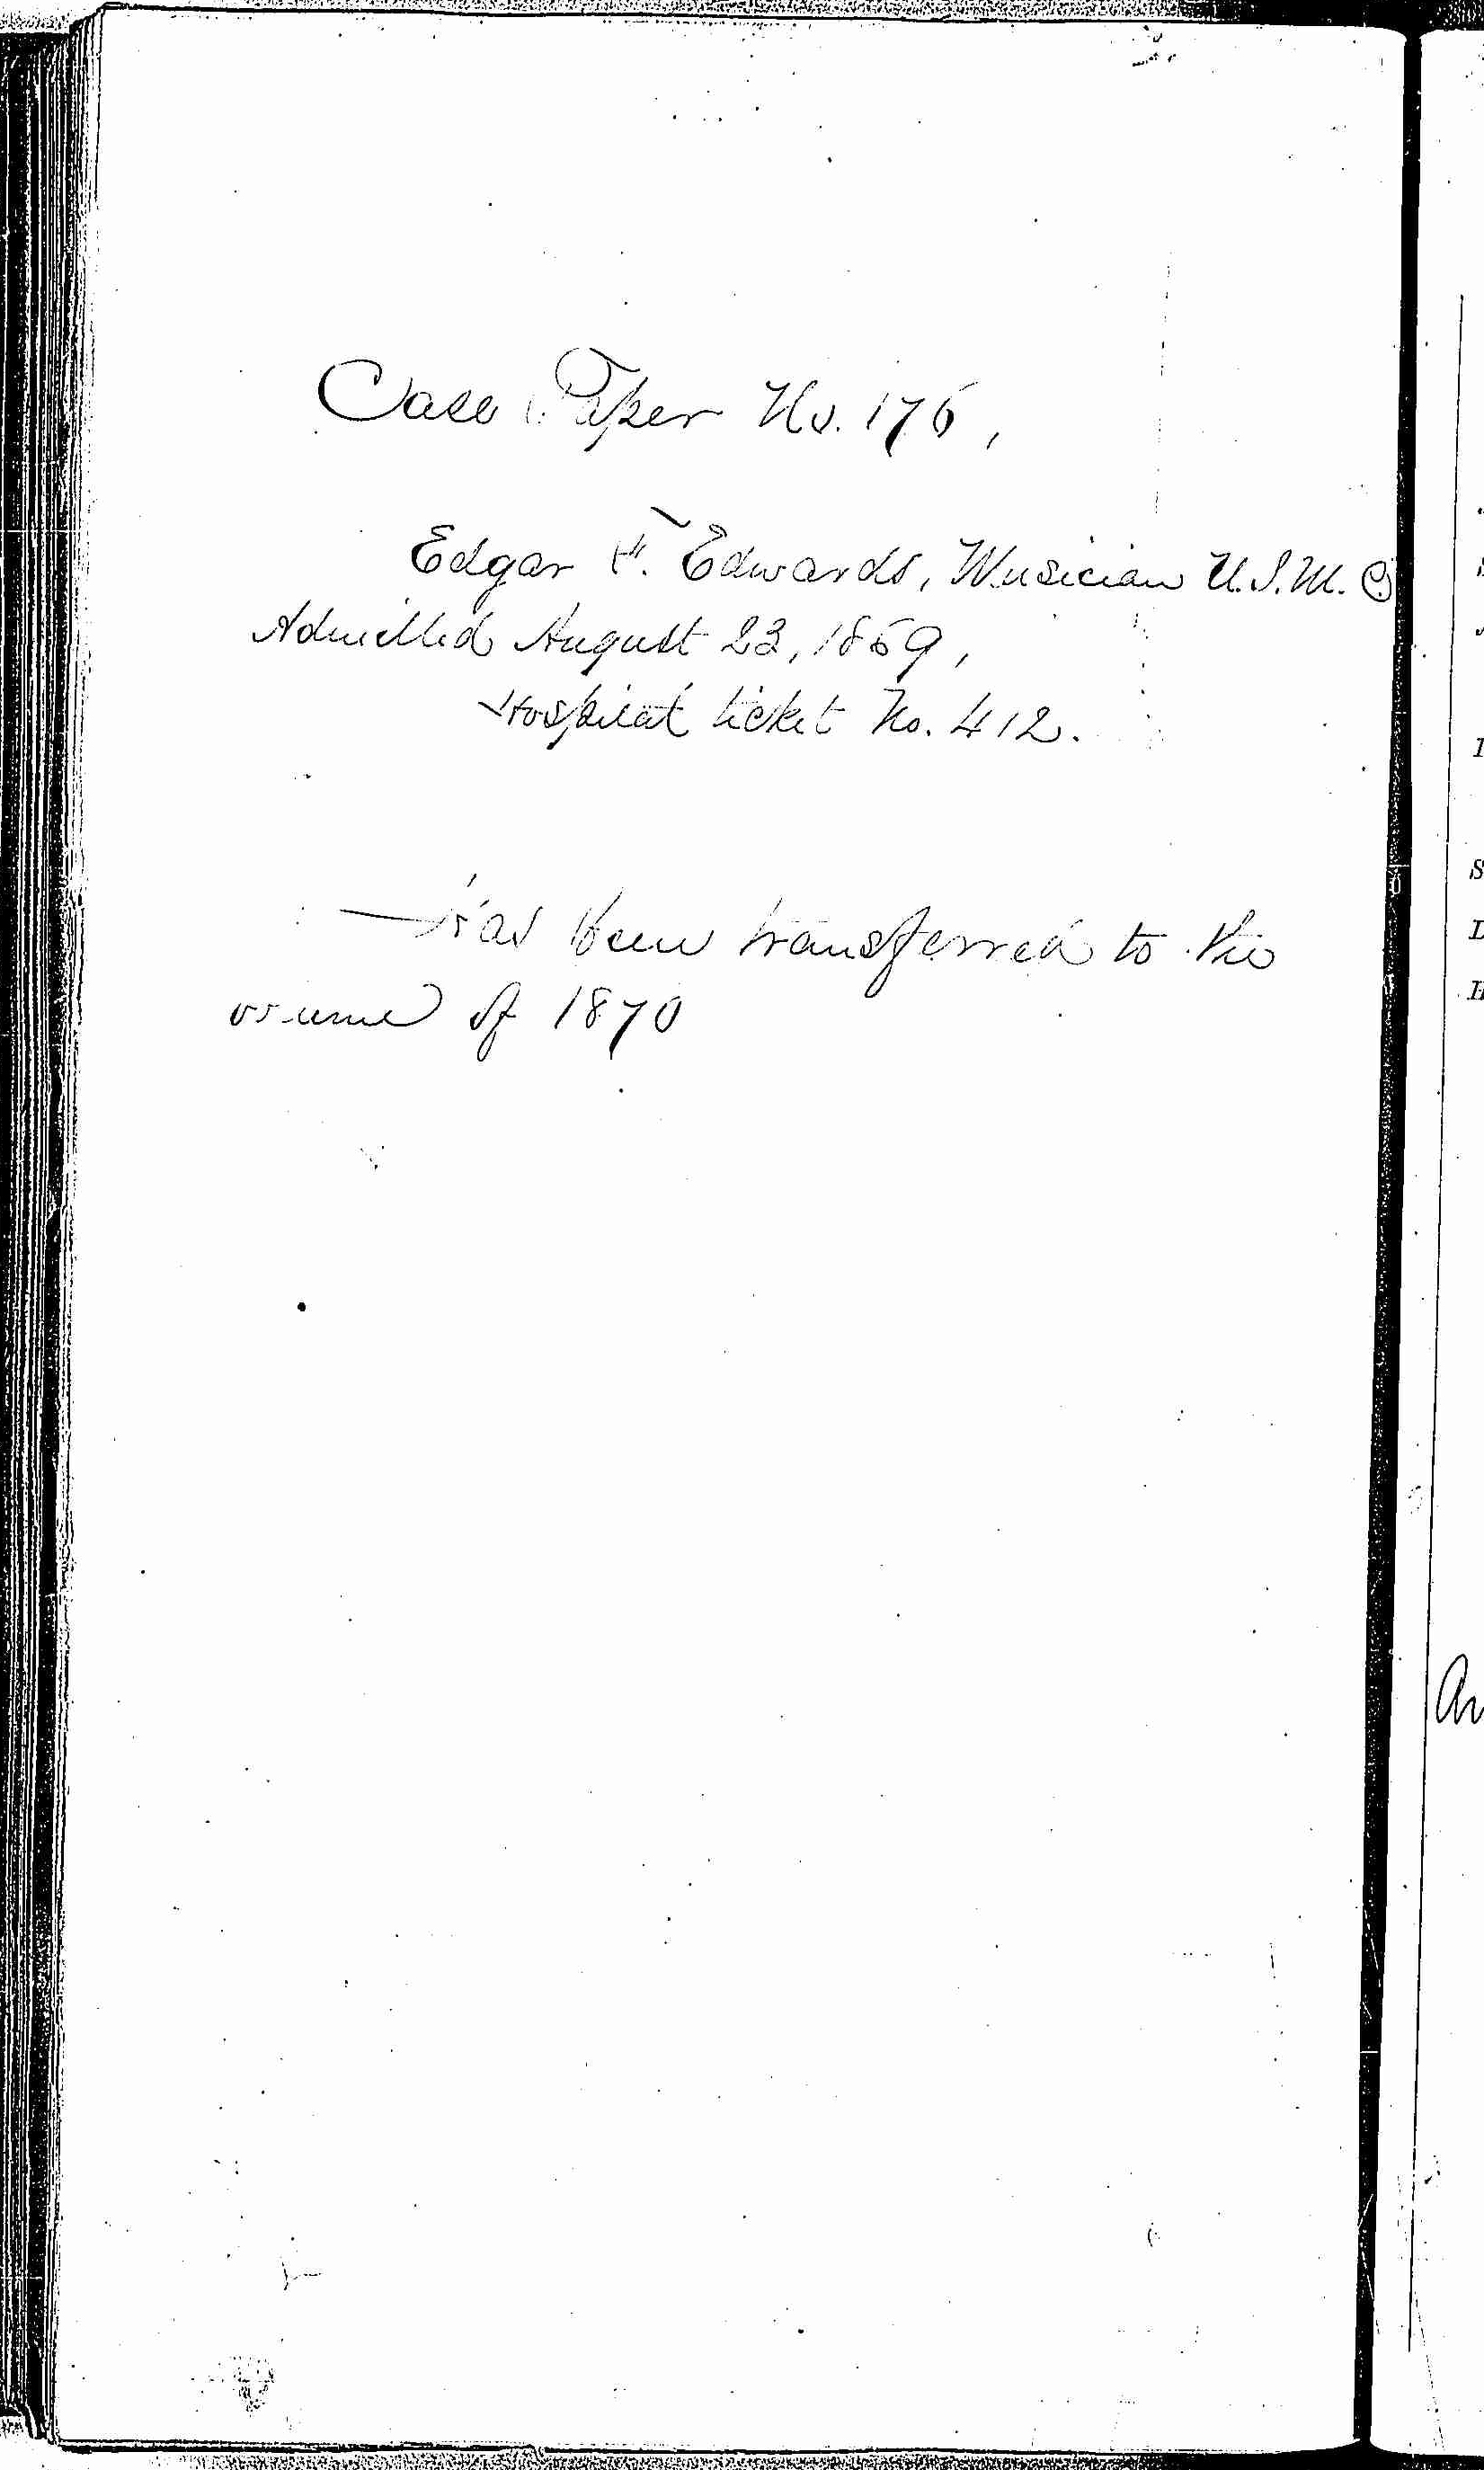 Entry for Edgar J. Edwards (page 1 of 1) in the log Hospital Tickets and Case Papers - Naval Hospital - Washington, D.C. - 1868-69